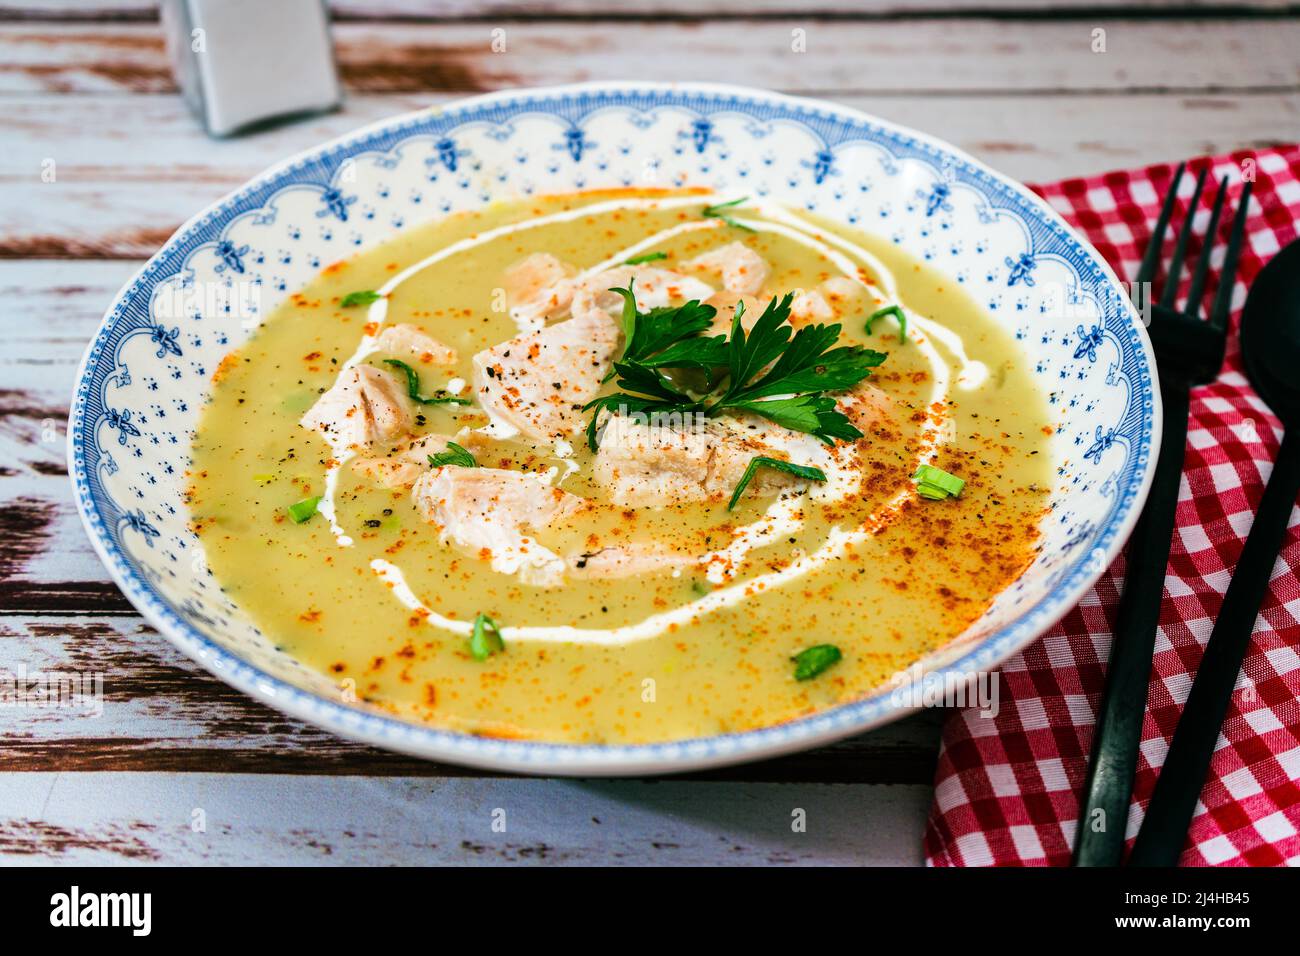 Exquisite dish with a homemade cream of poultry soup with chicken pieces, parsley and cream on a rustic or country style wooden table. Natural and sim Stock Photo